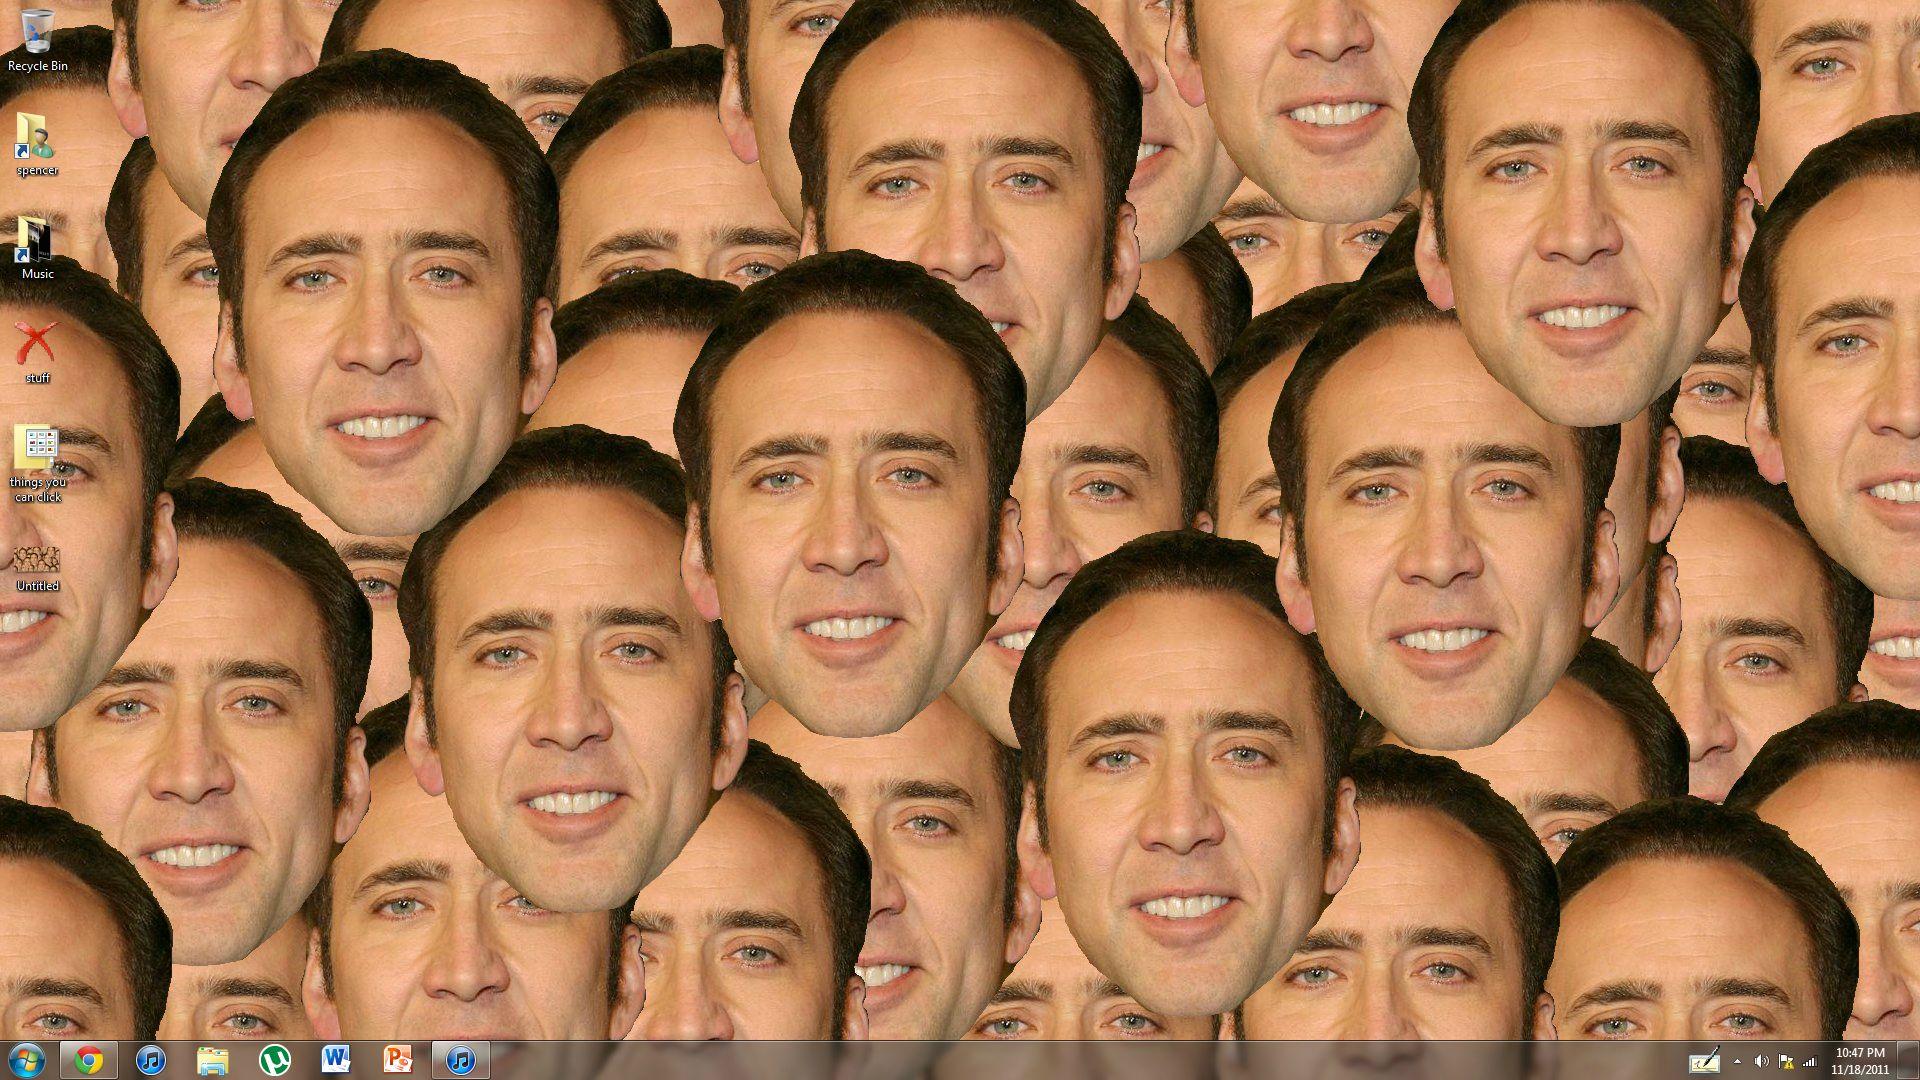 download nicolas cage wallpaper hd backgrounds download itl cat download nicolas cage wallpaper hd